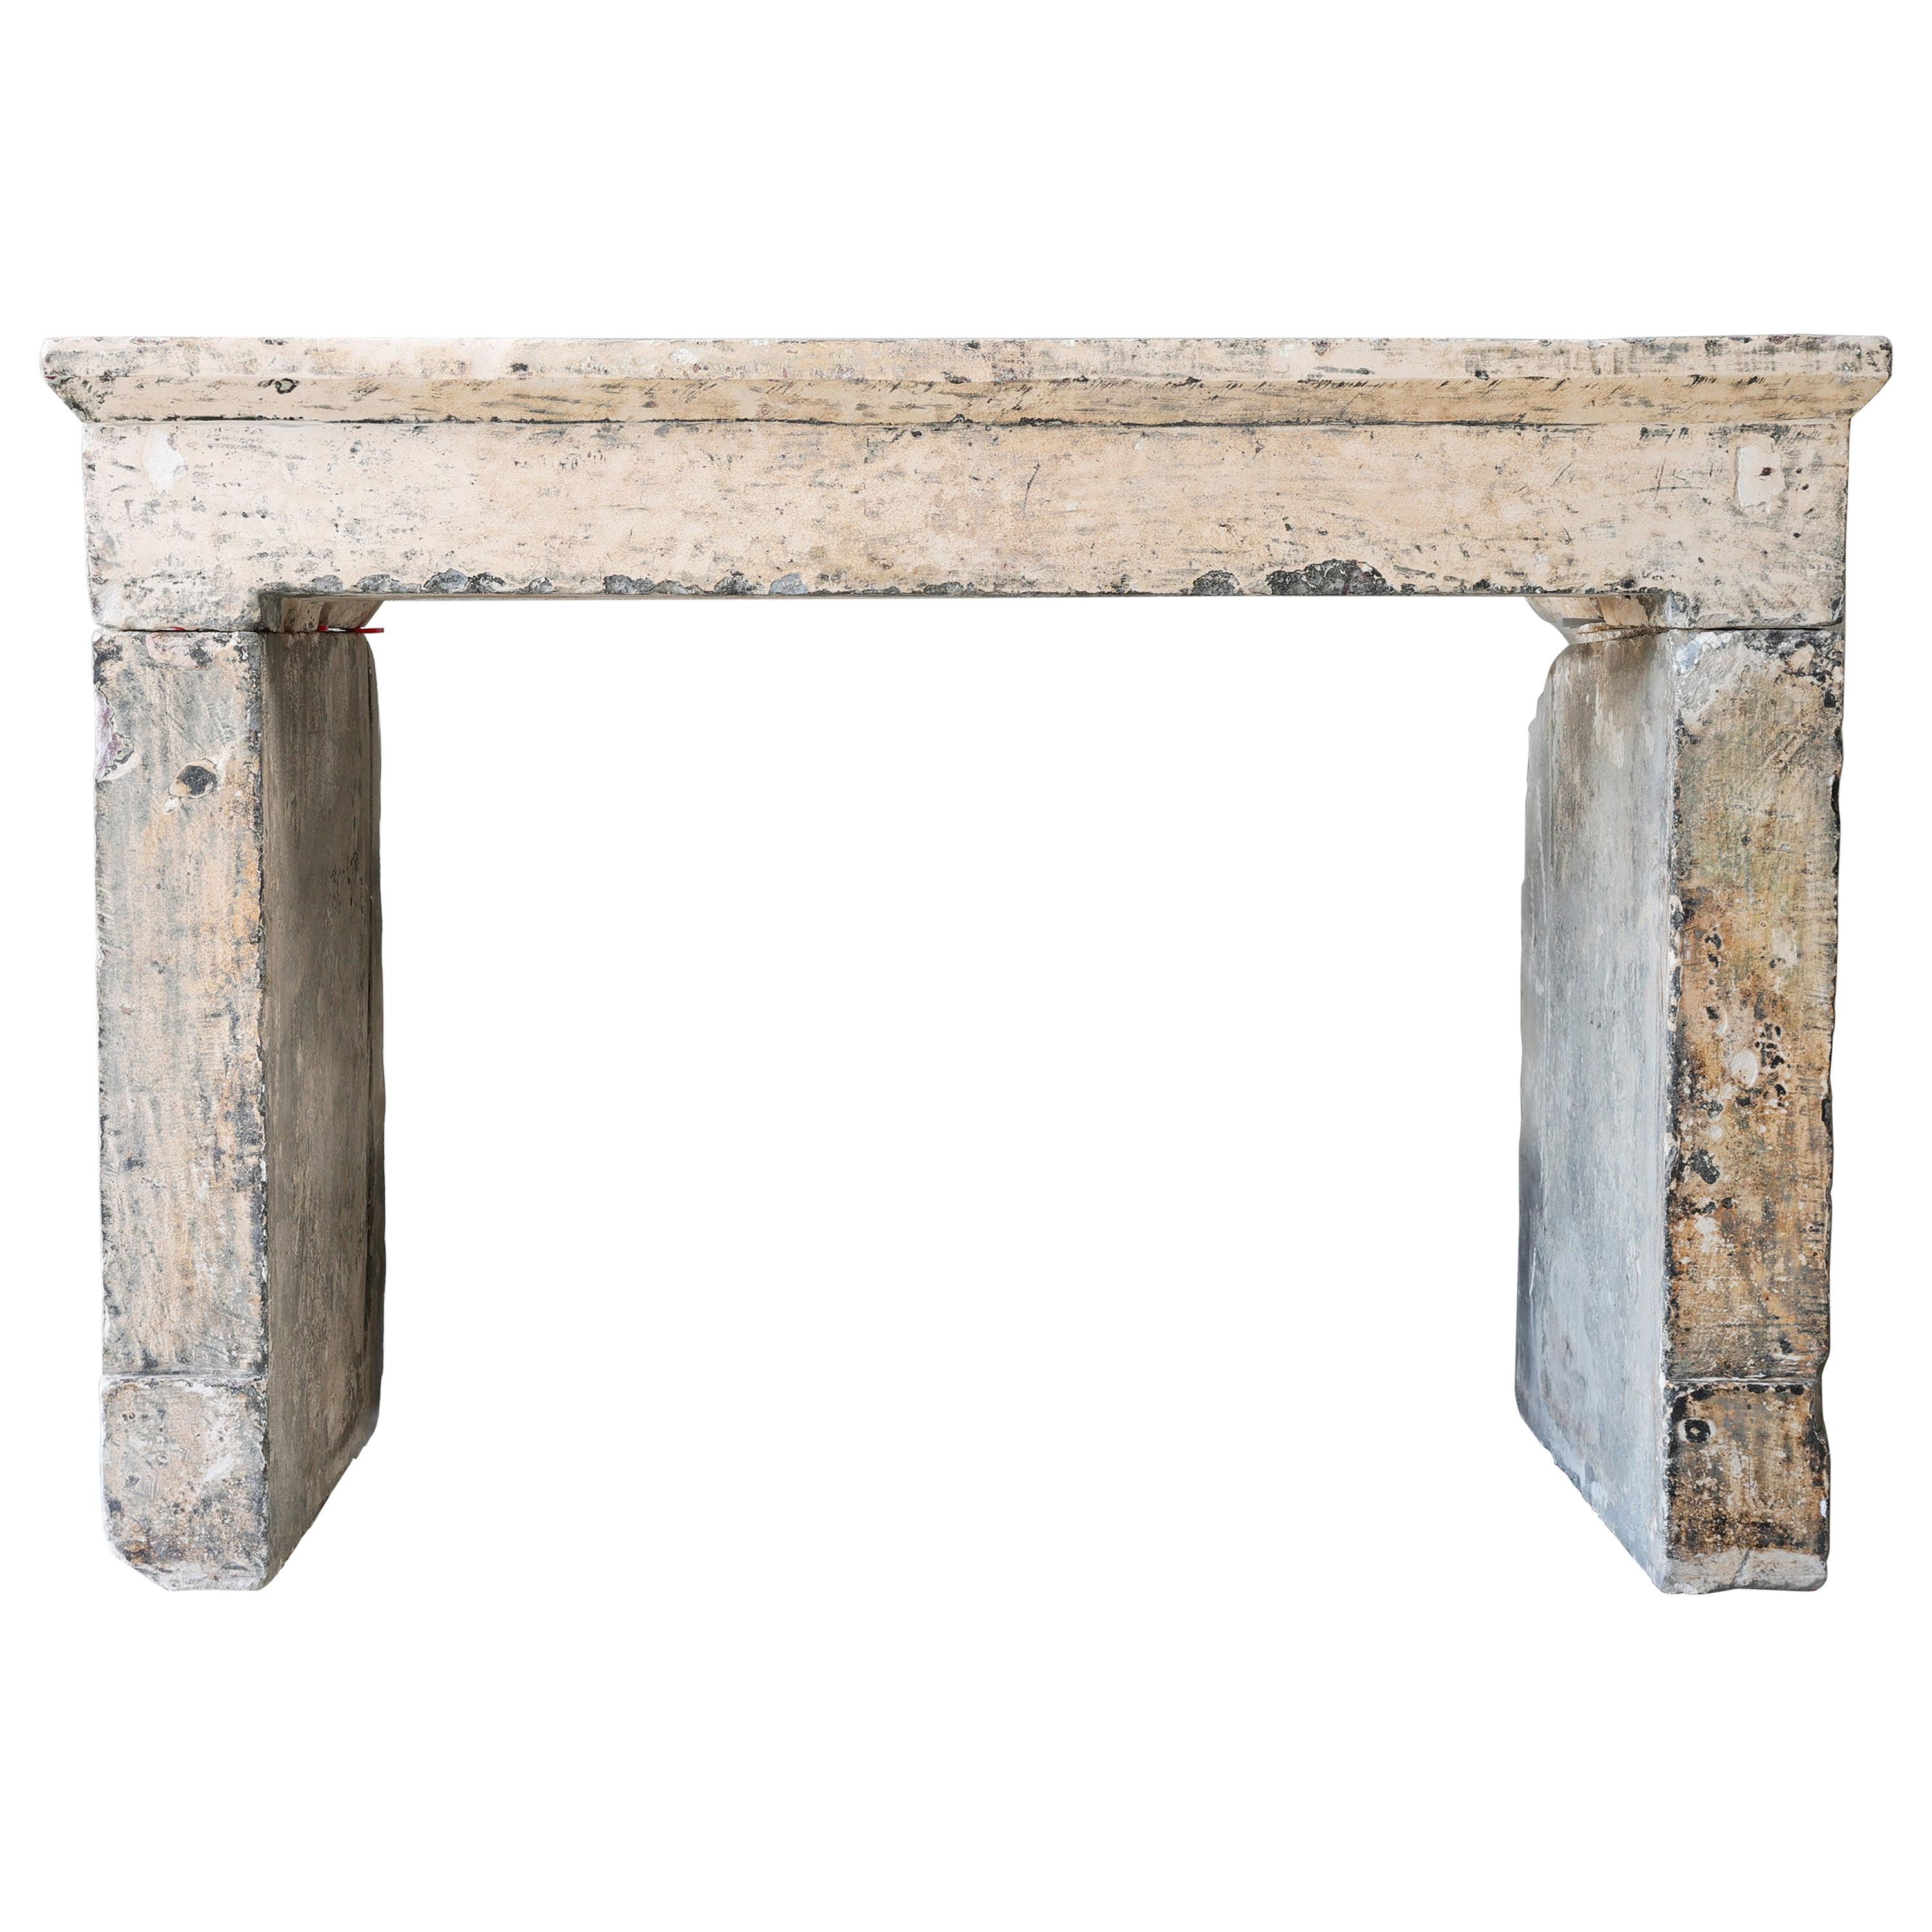 18th Century Limestone Fireplace from the French Countryside